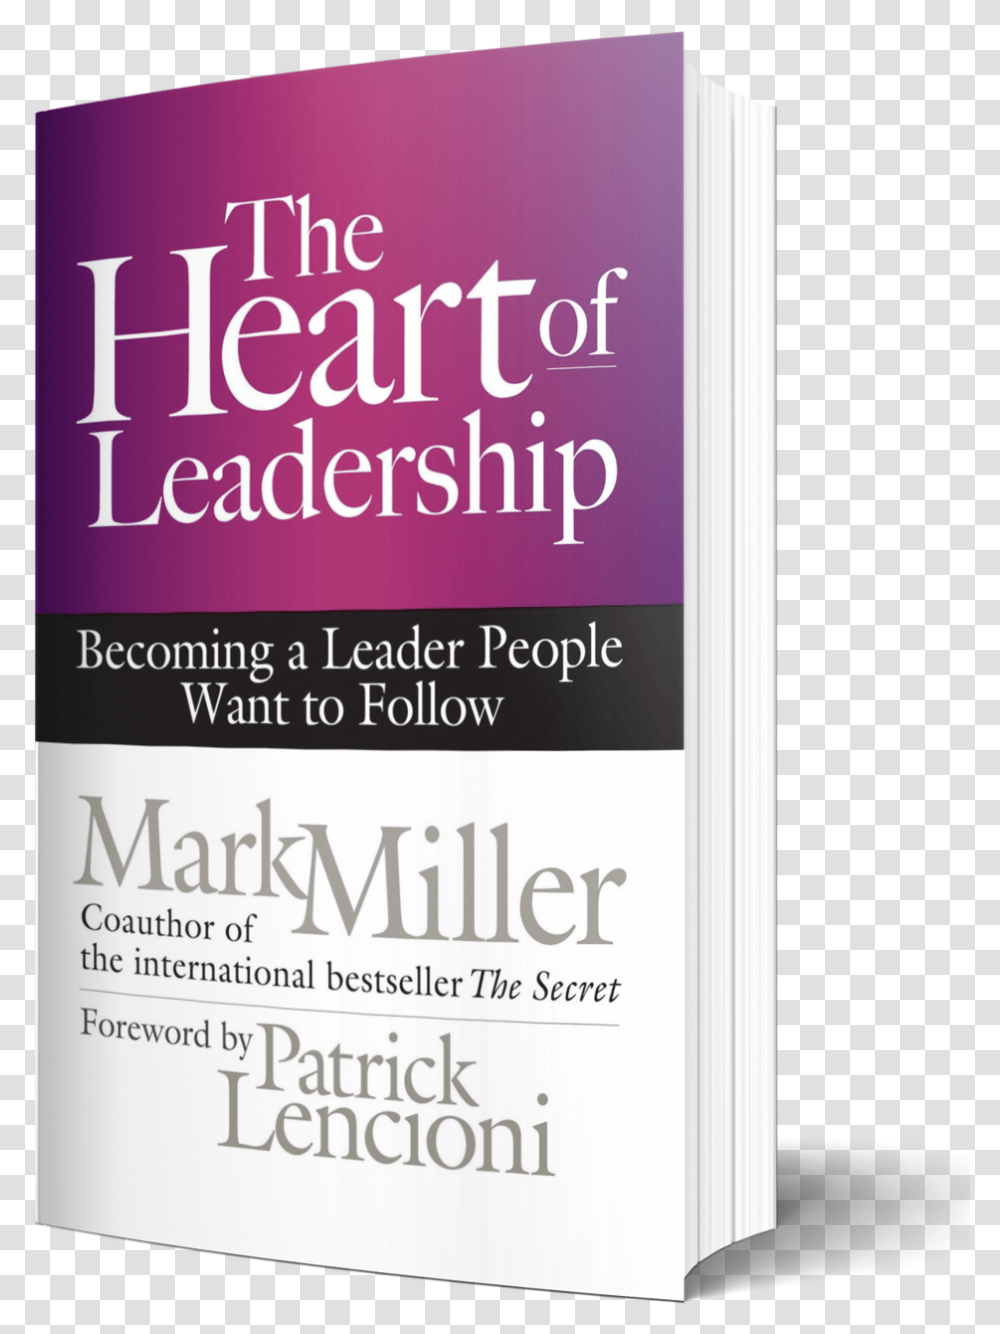 The Heart Of Leadership 3d Book Cover, Bottle, Beverage, Alcohol, Tin Transparent Png